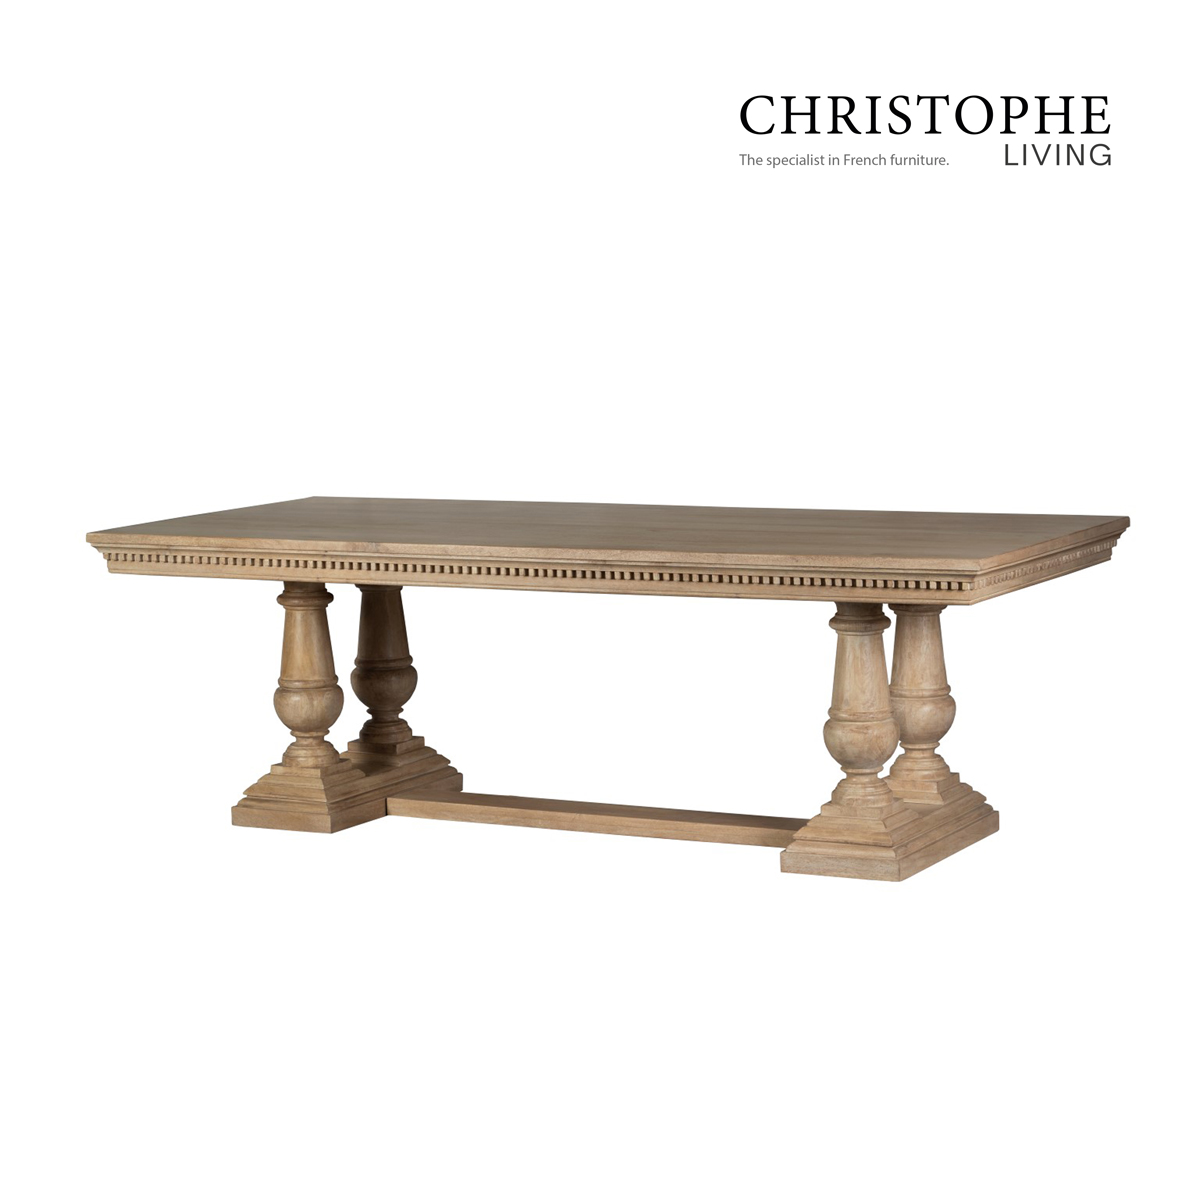 Valentino French Provincial Coffee Table - Solid Timber in Light Walnut Finish for Living Room